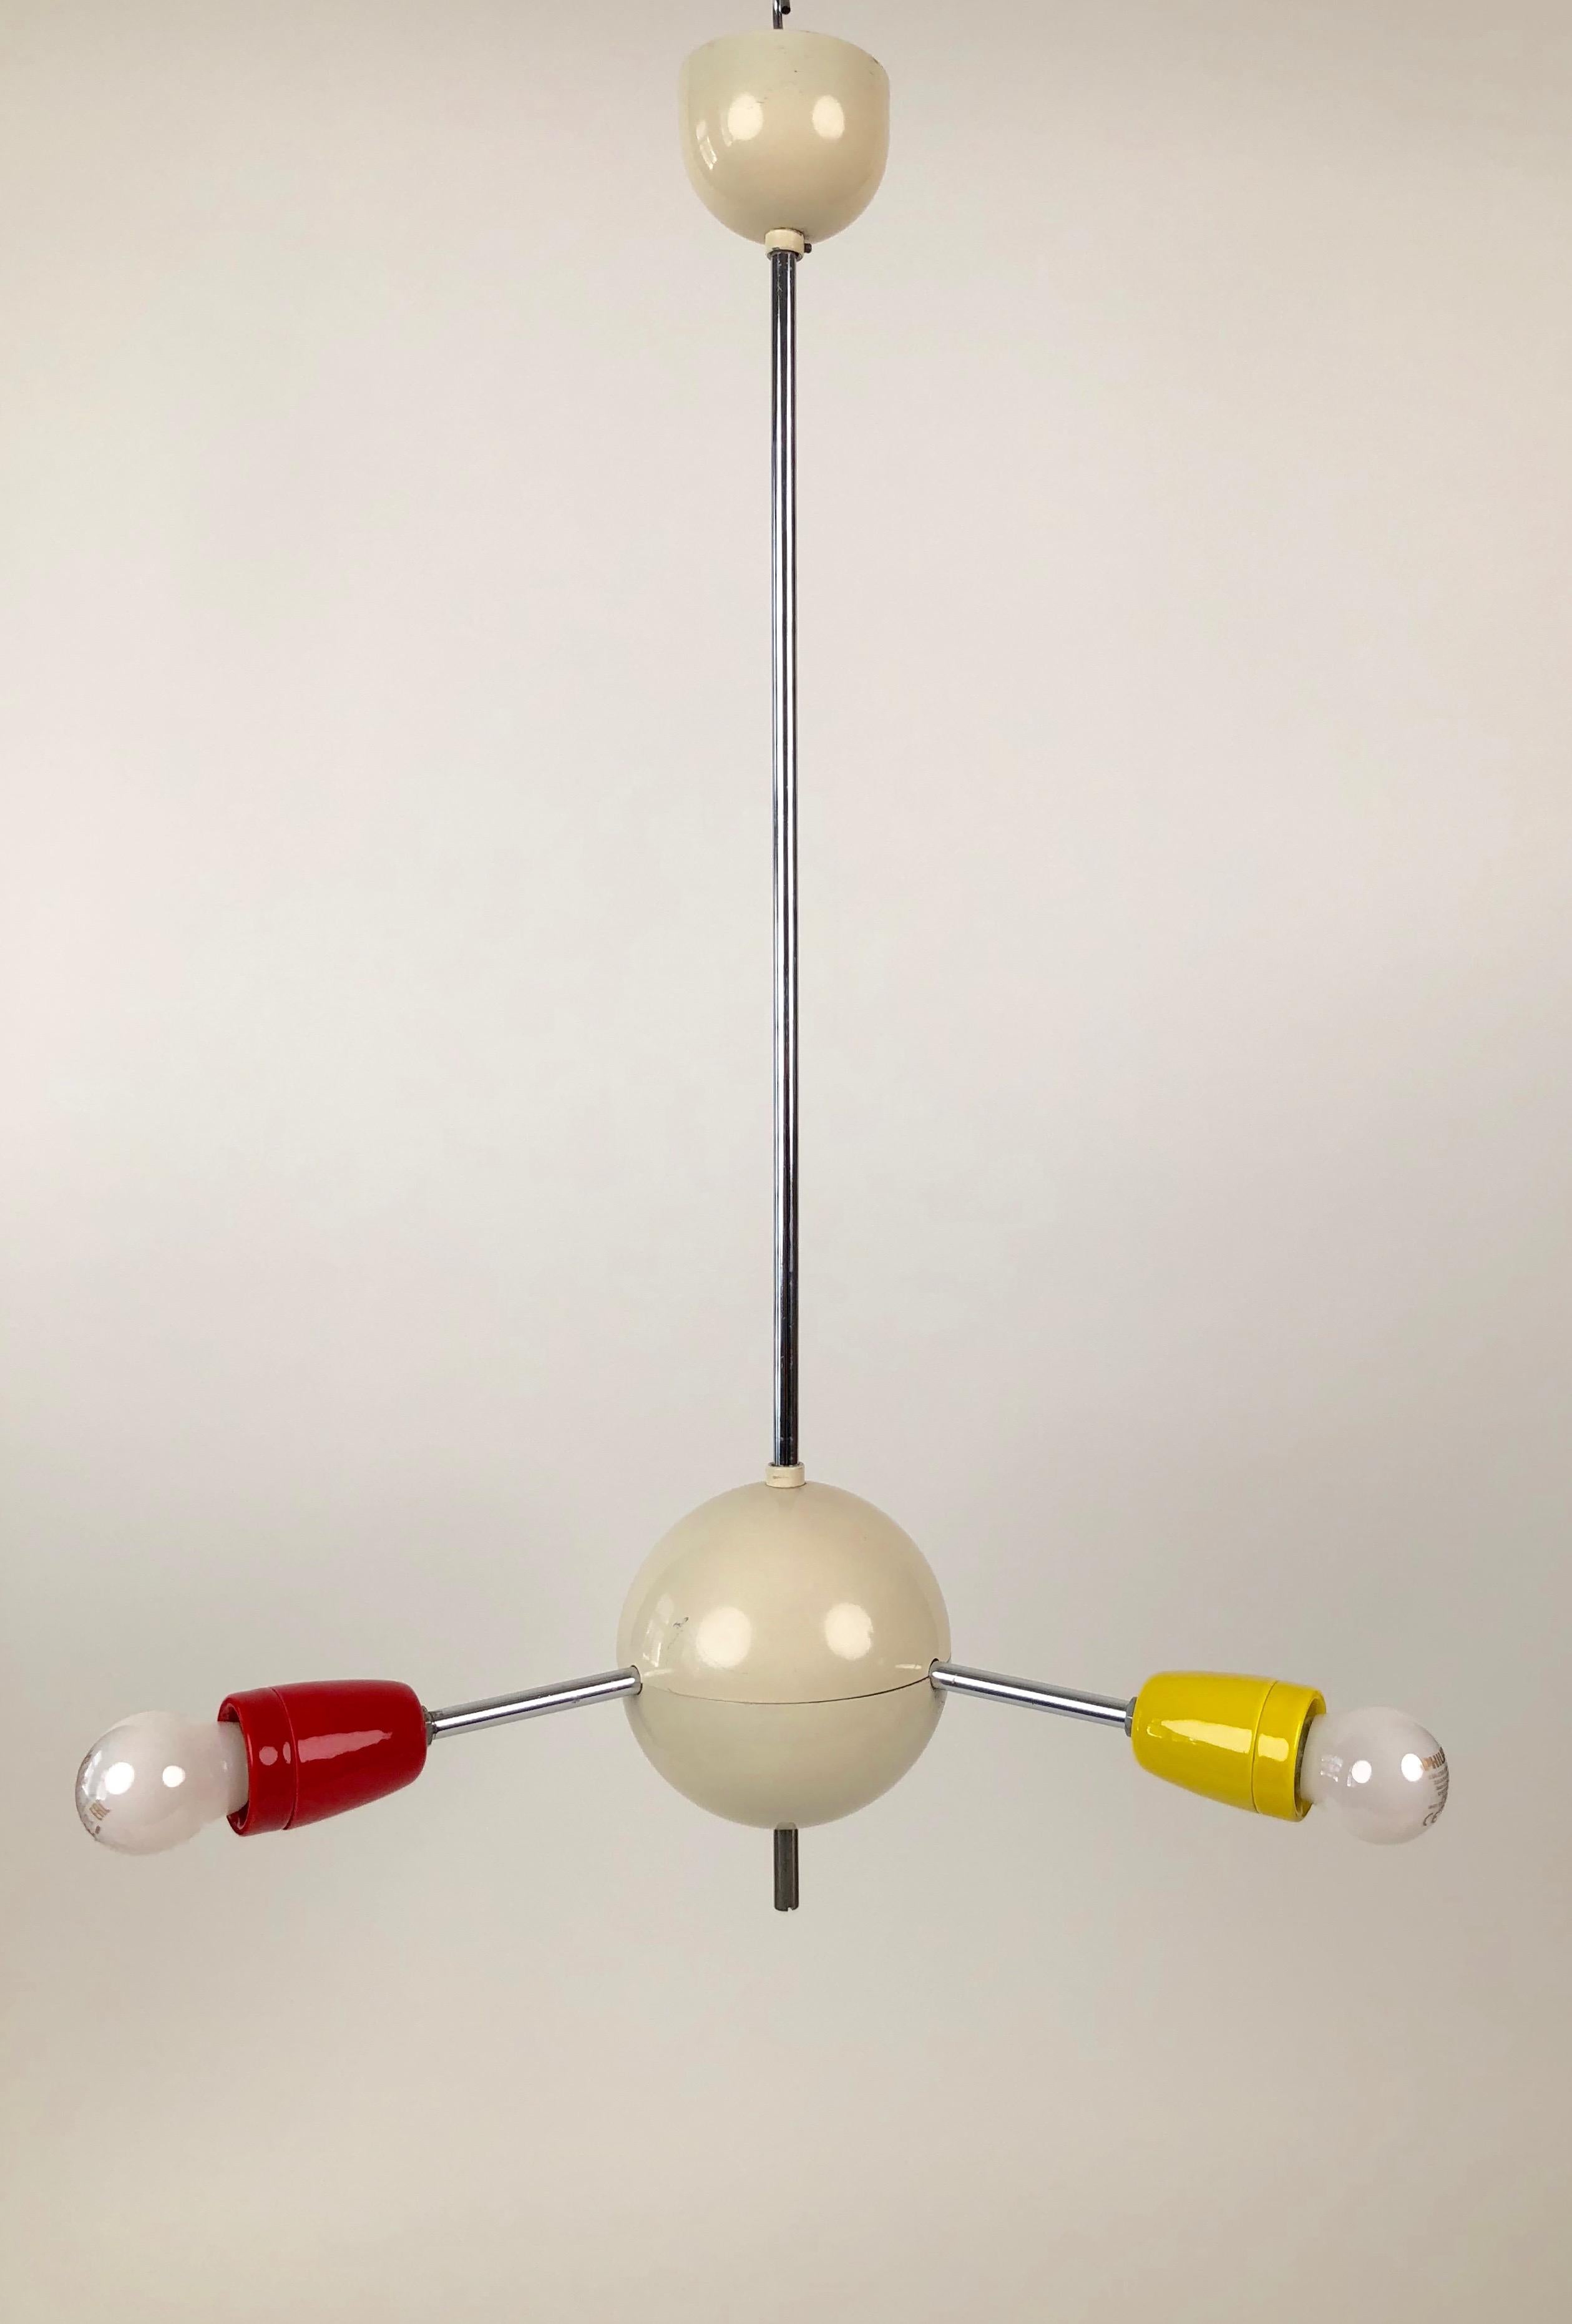 Sputnik from the 1960s, made in the Czech Republic. This three armed Sputnik has 3 colored ceramic sockets in red, yellow and black.
The body is made of steel with a cream colour as is the ceiling cap. The connecting tube is chrome-plated.